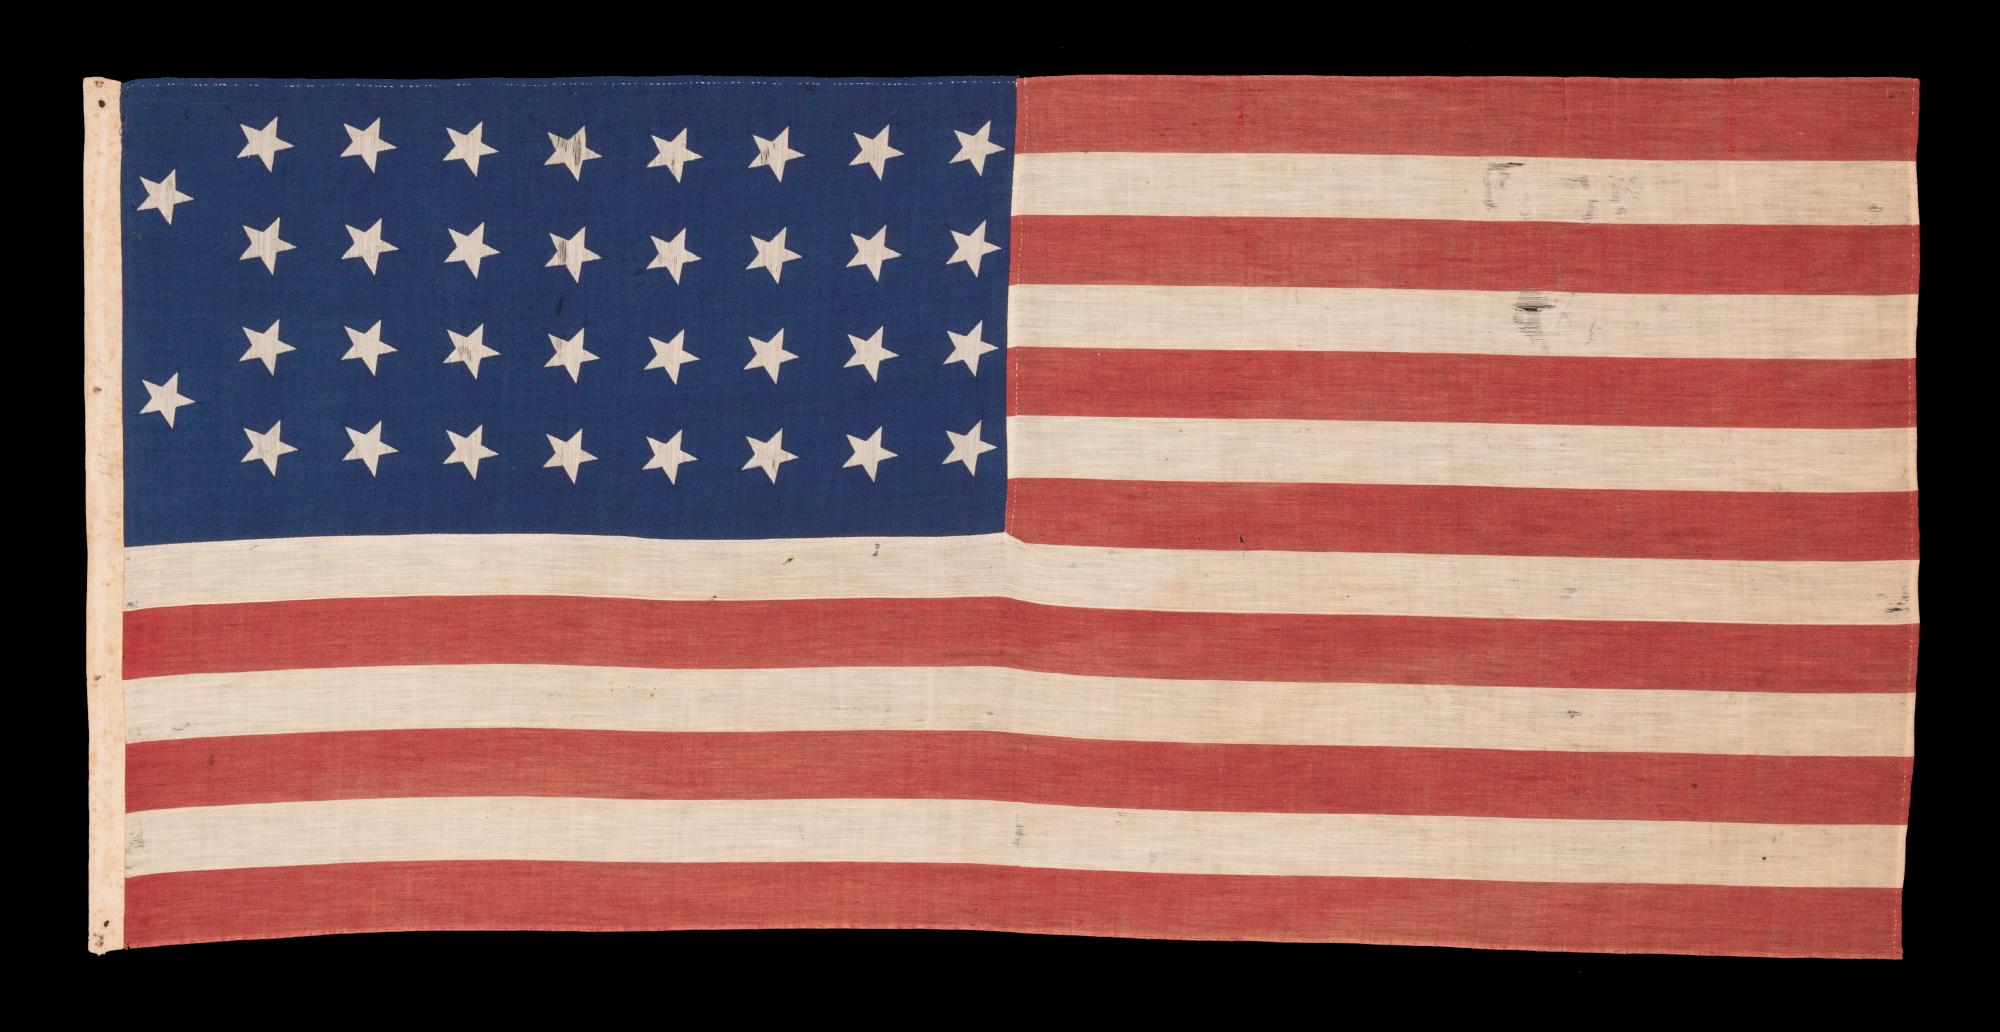 34 STARS IN 4 ROWS WITH 2 STARS OFFSET AT THE HOIST END, ON AN ANTIQUE AMERICAN FLAG LIKELY PRODUCED FOR MILITARY FUNCTION, AS UNION ARMY CAMP COLORS;  ONE OF JUST A TINY HANDFUL THAT I HAVE ENCOUNTERED IN THIS EXACT STYLE, REFLECTS KANSAS